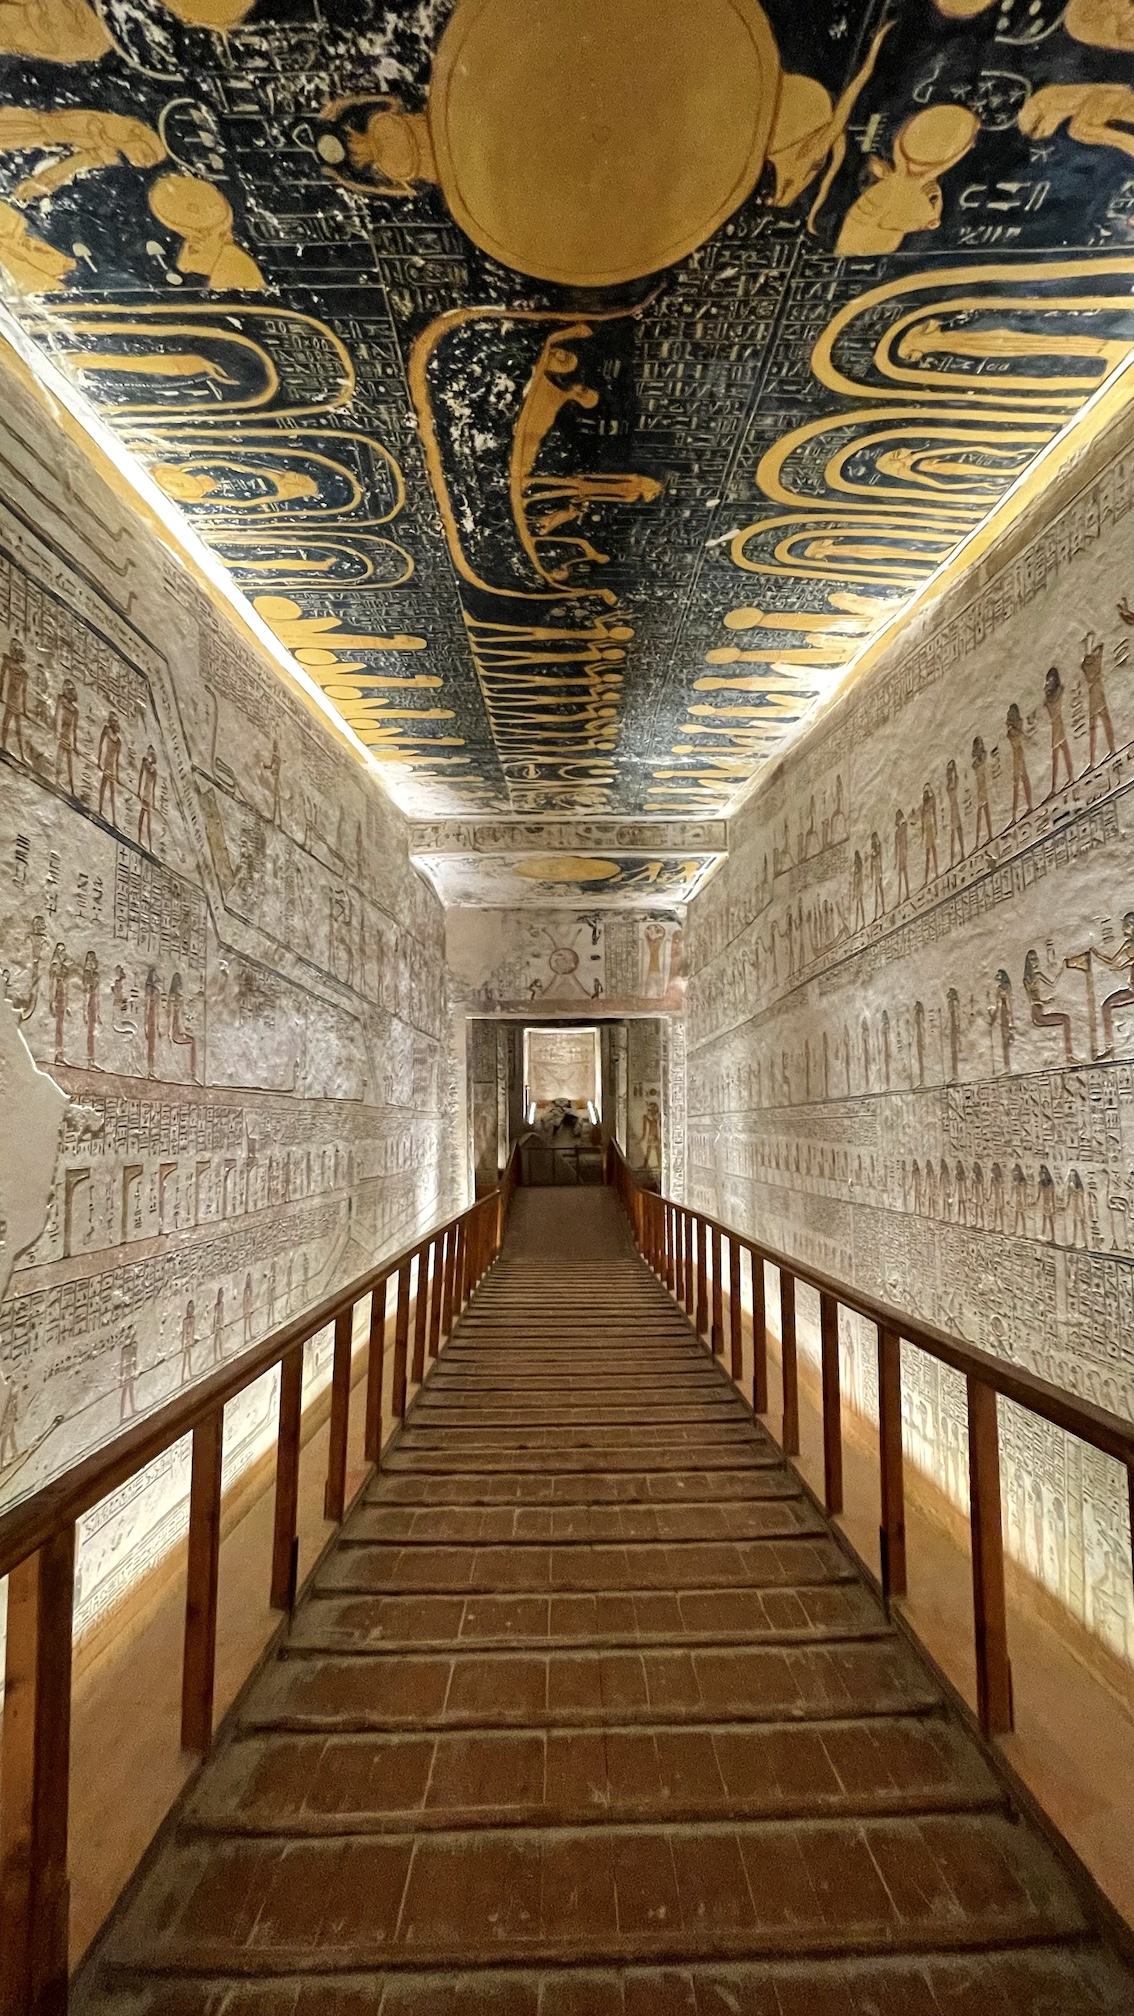 Entrance to the Tomb of Ramses III in the Kings Valley in Luxor